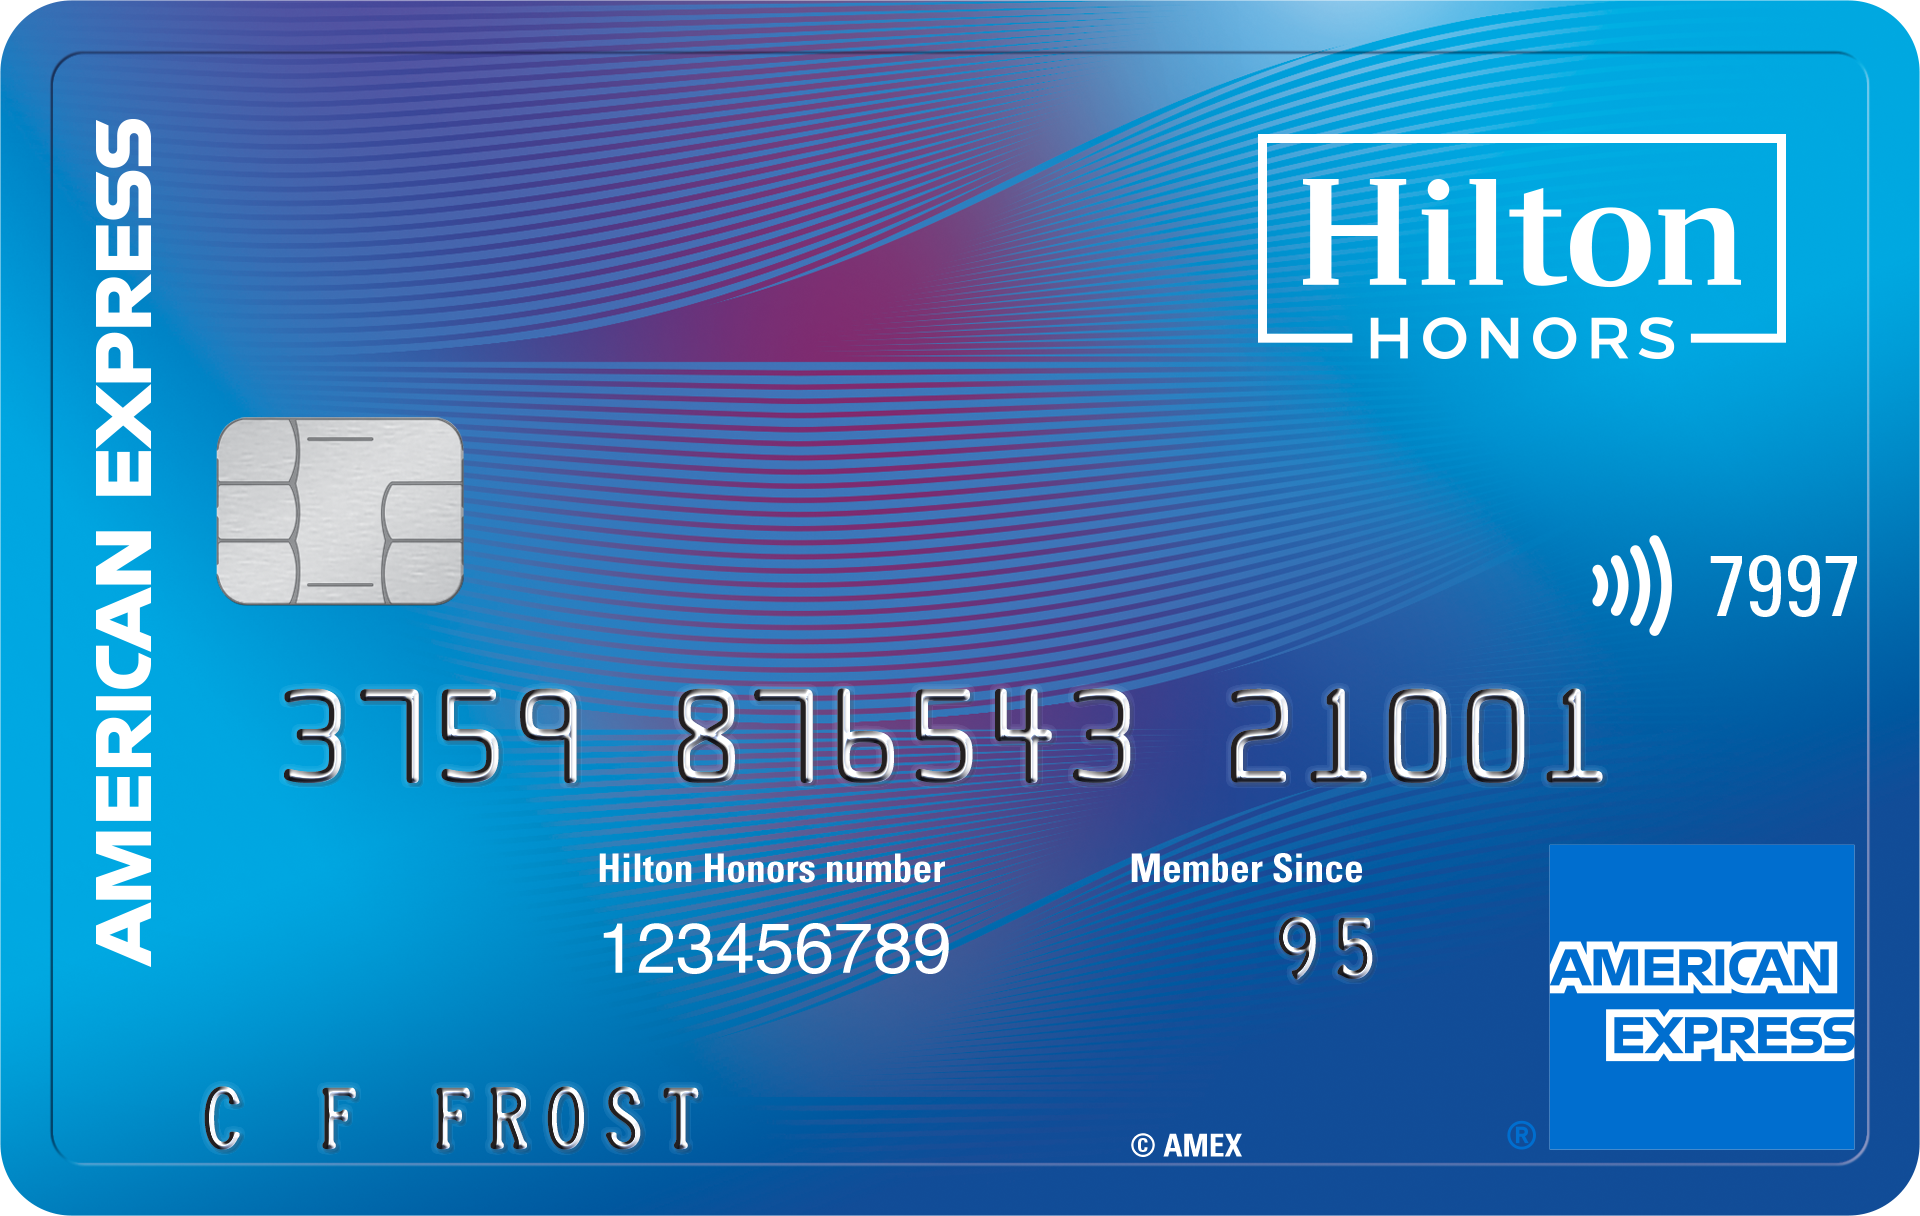 Hilton Honors card, chip enabled, features contactless tap to pay